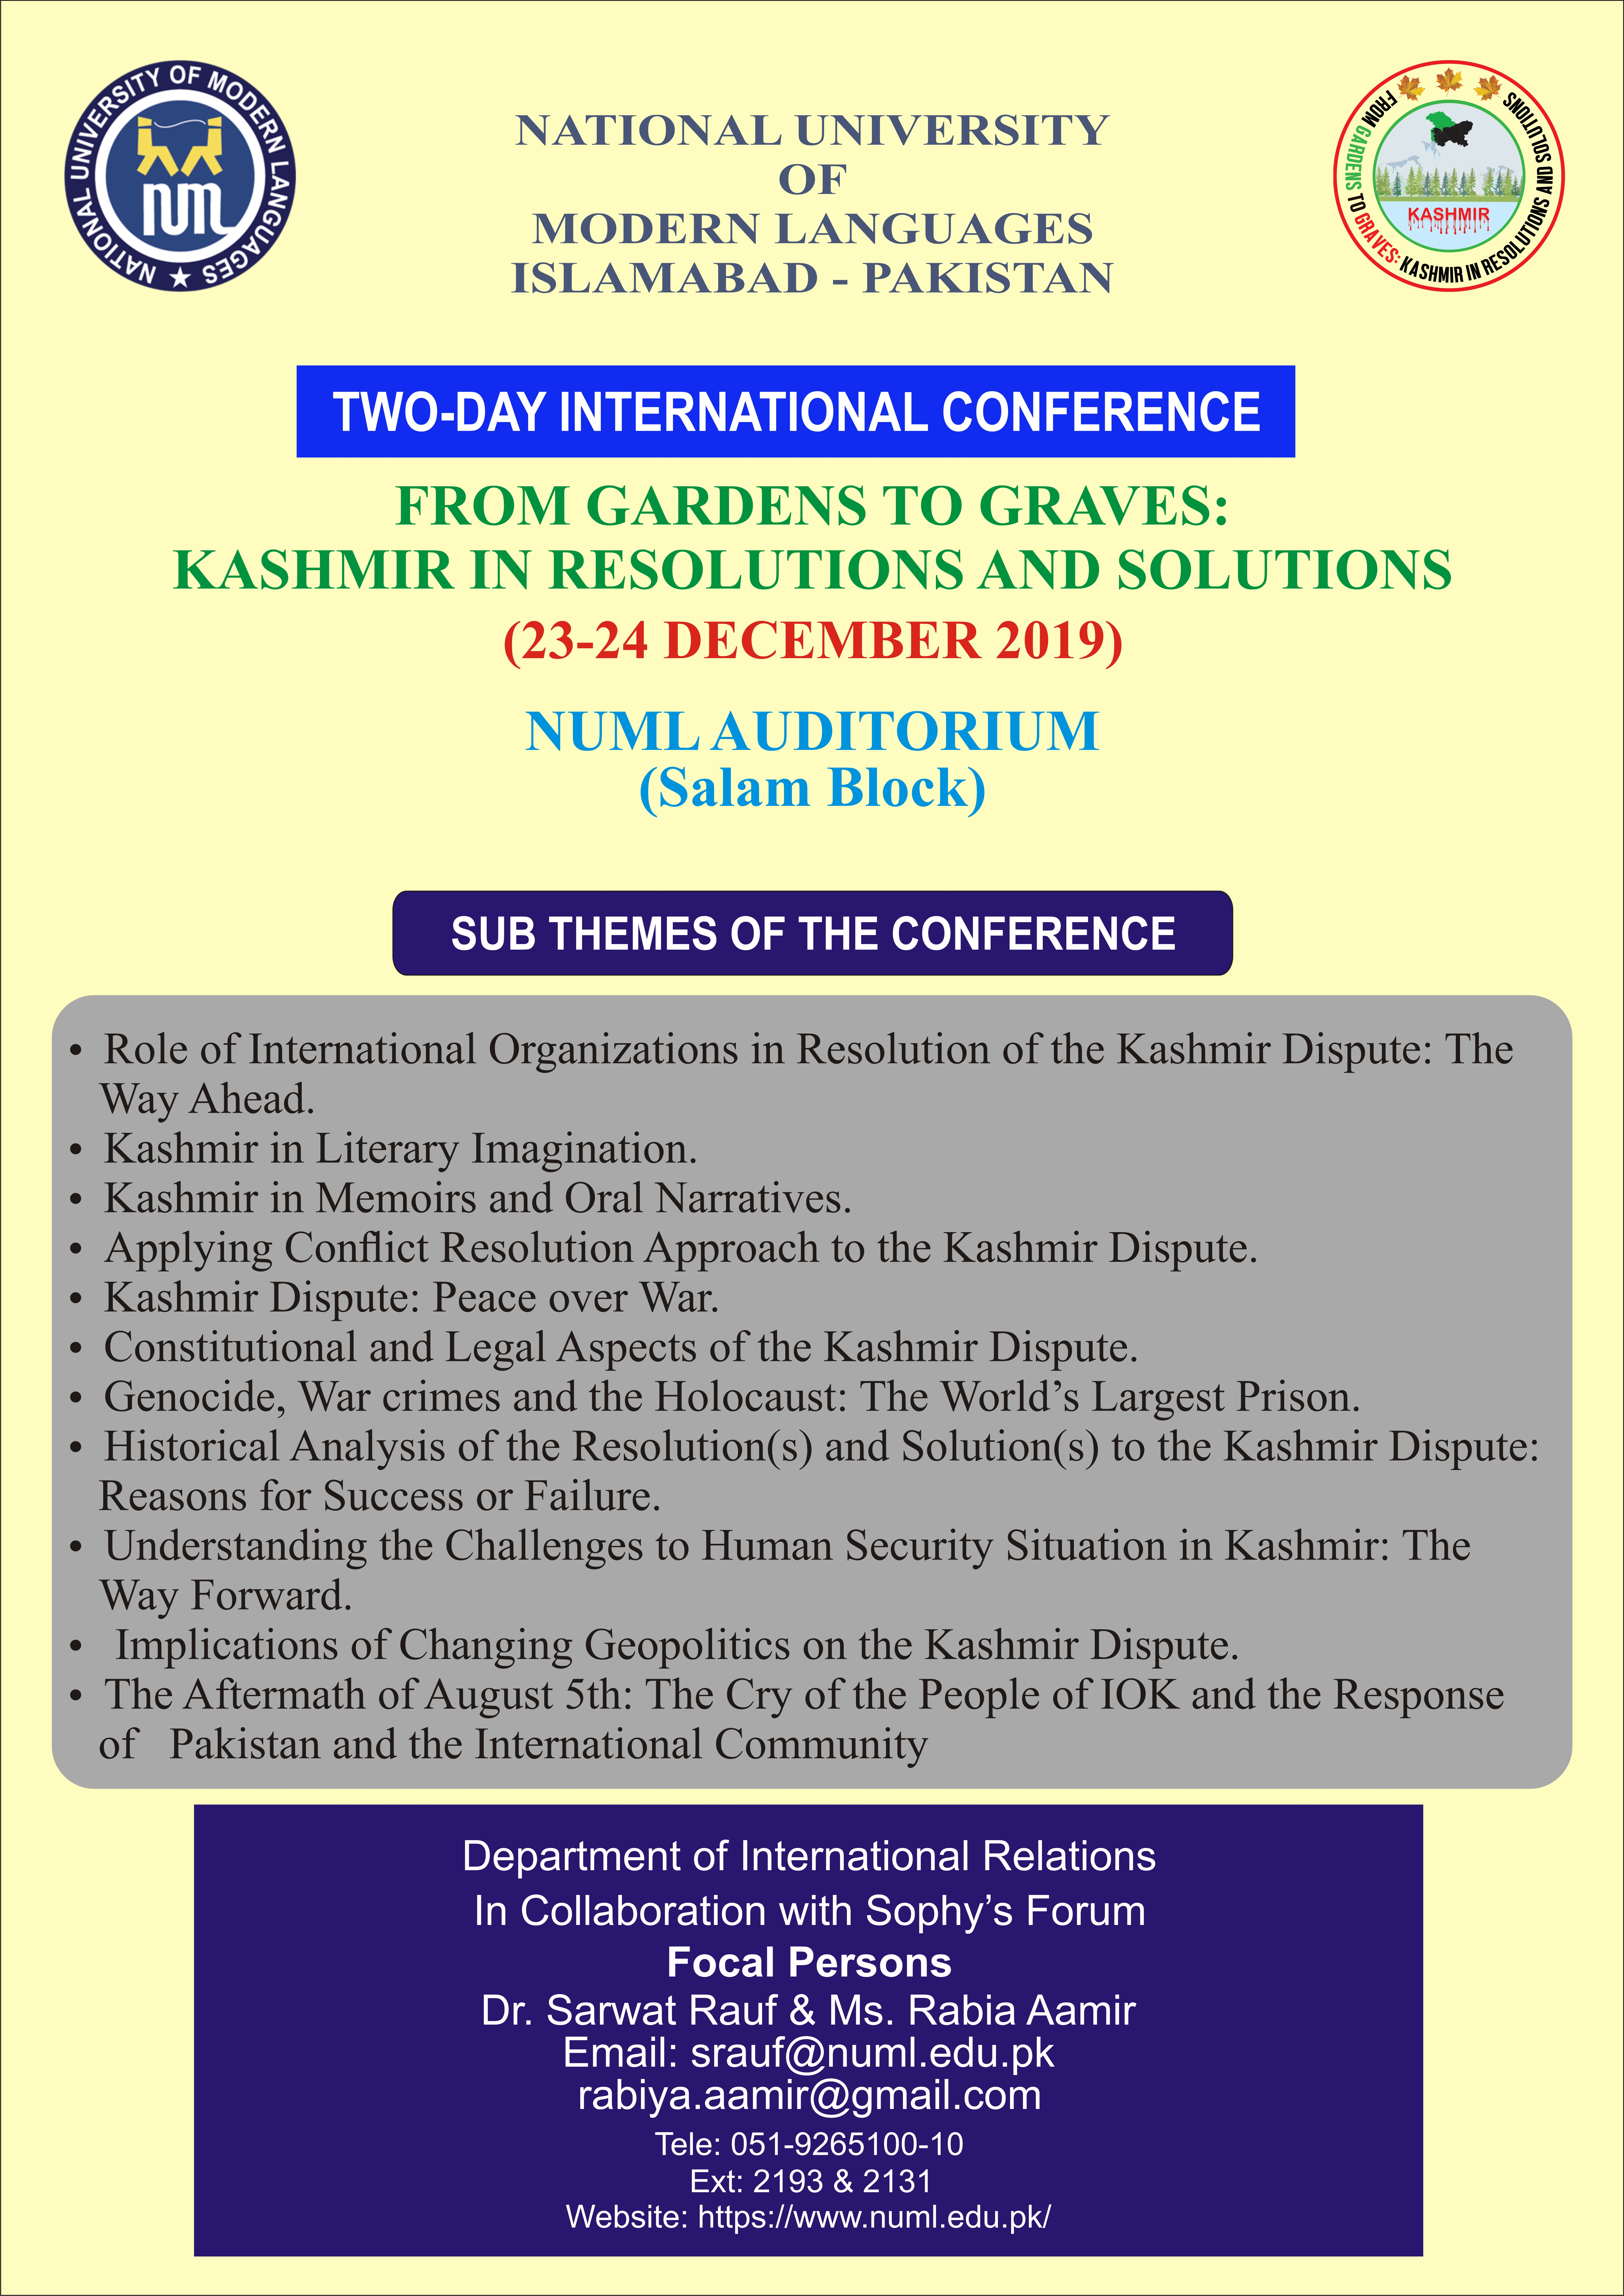 TWO-DAY INTERNATIONAL CONFERENCE “FROM GARDEN TO GRAVES: KASHMIR IN RESOLUTIONS AND SOLUTIONS”